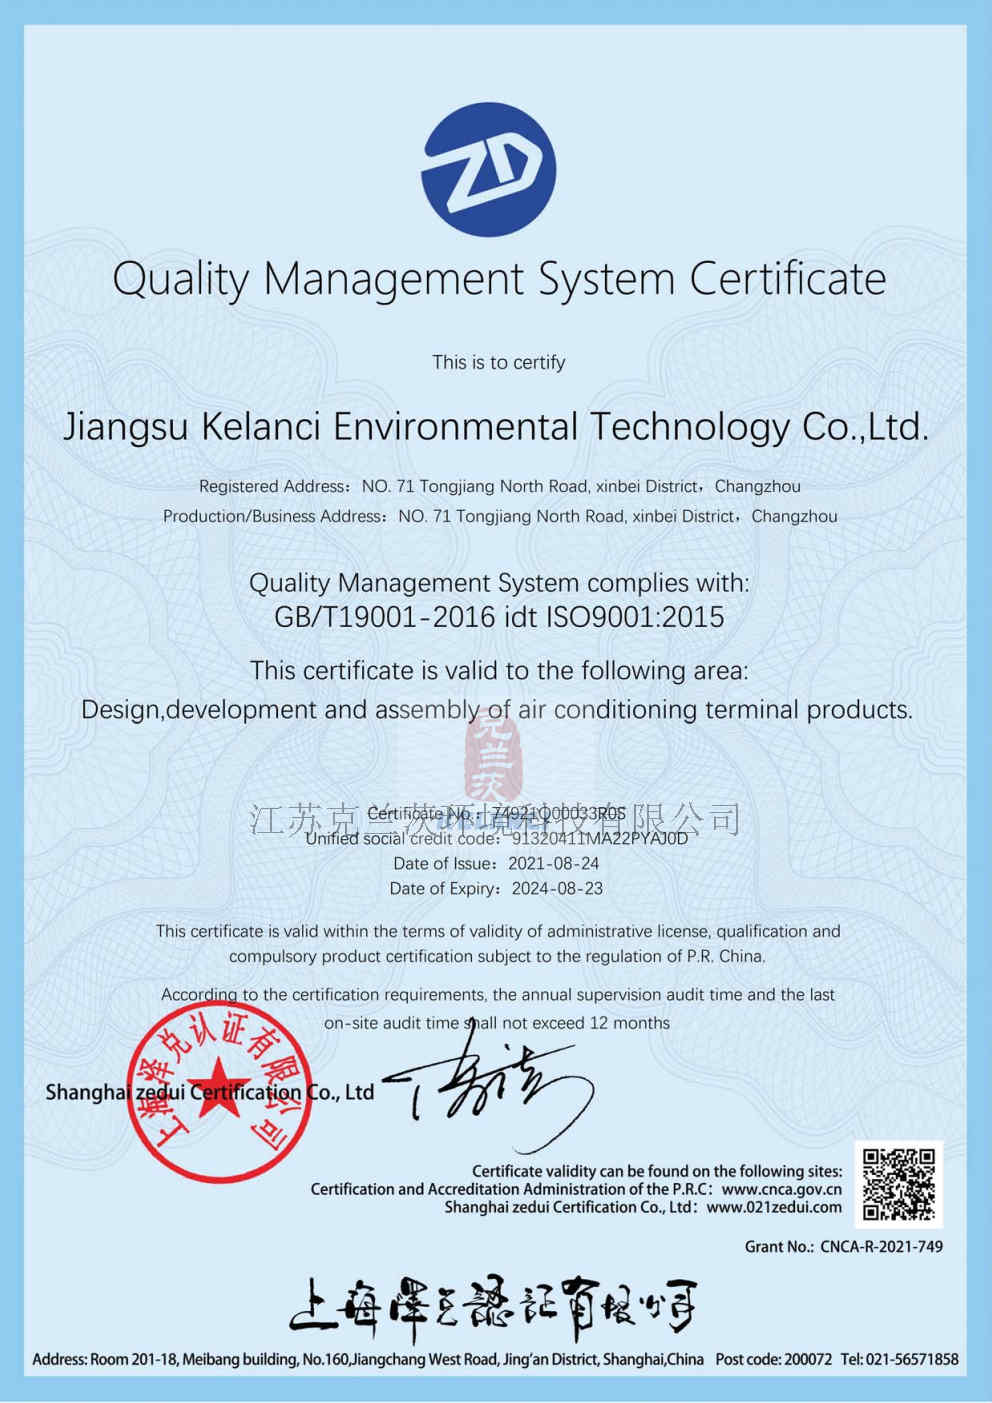 Quality Management System Certificate(图1)